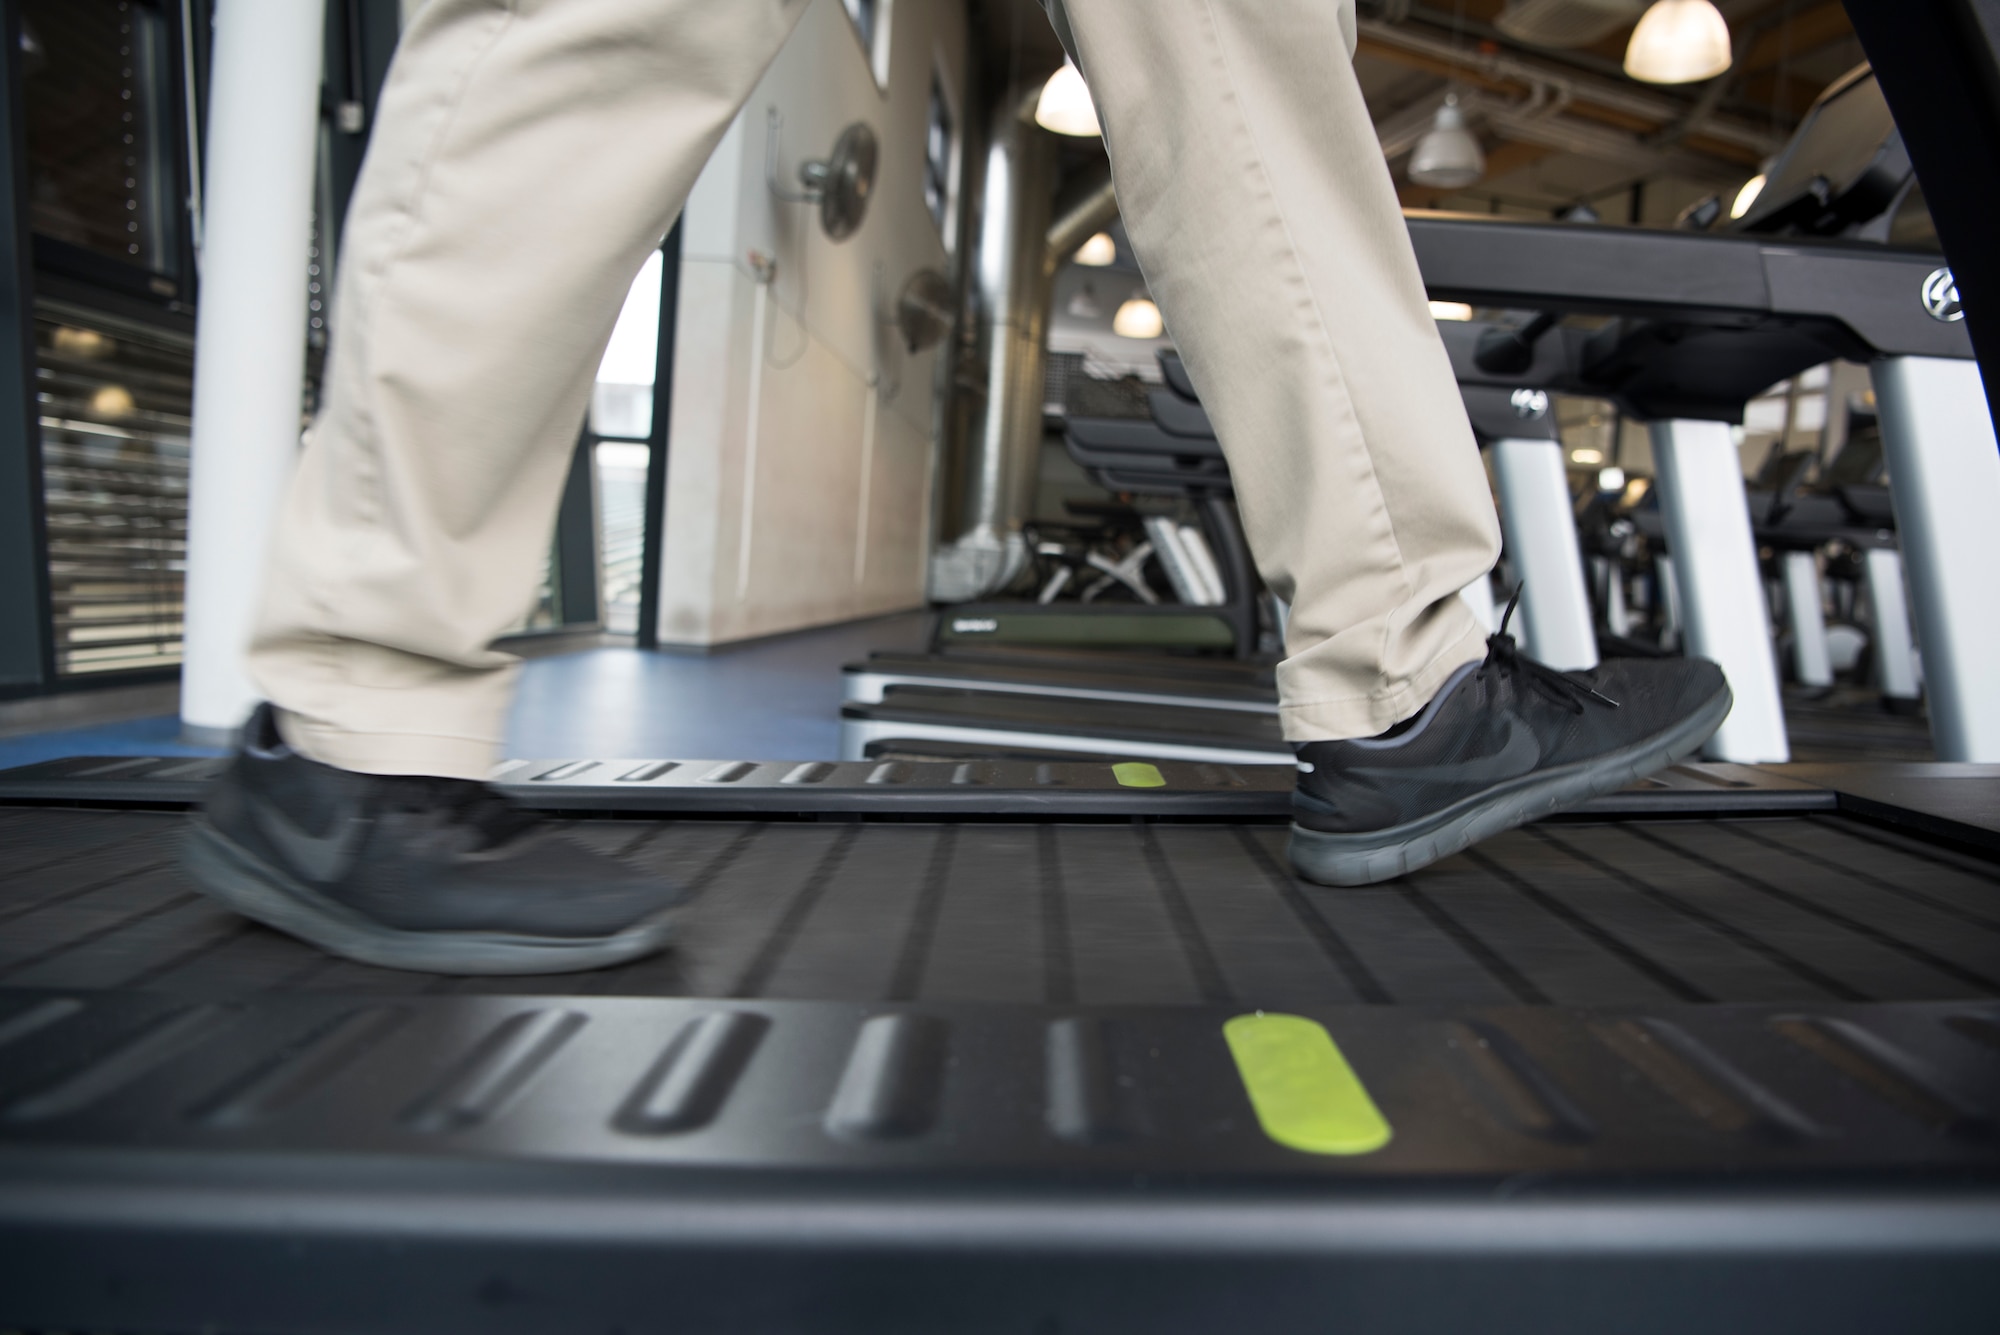 Master Sgt. Joseph McTaggart, non-commissioned officer in charge of Ramstein Air Base Southside Fitness Center walks on one of the new environmentally friendly treadmills at the Southside fitness center on Ramstein Air Base, Germany, Oct. 4, 2019. The treadmill functions entirely on the individuals own energy. As the individual moves, the treadmill transfers the individuals energy into usable energy which is put back into the power grid.